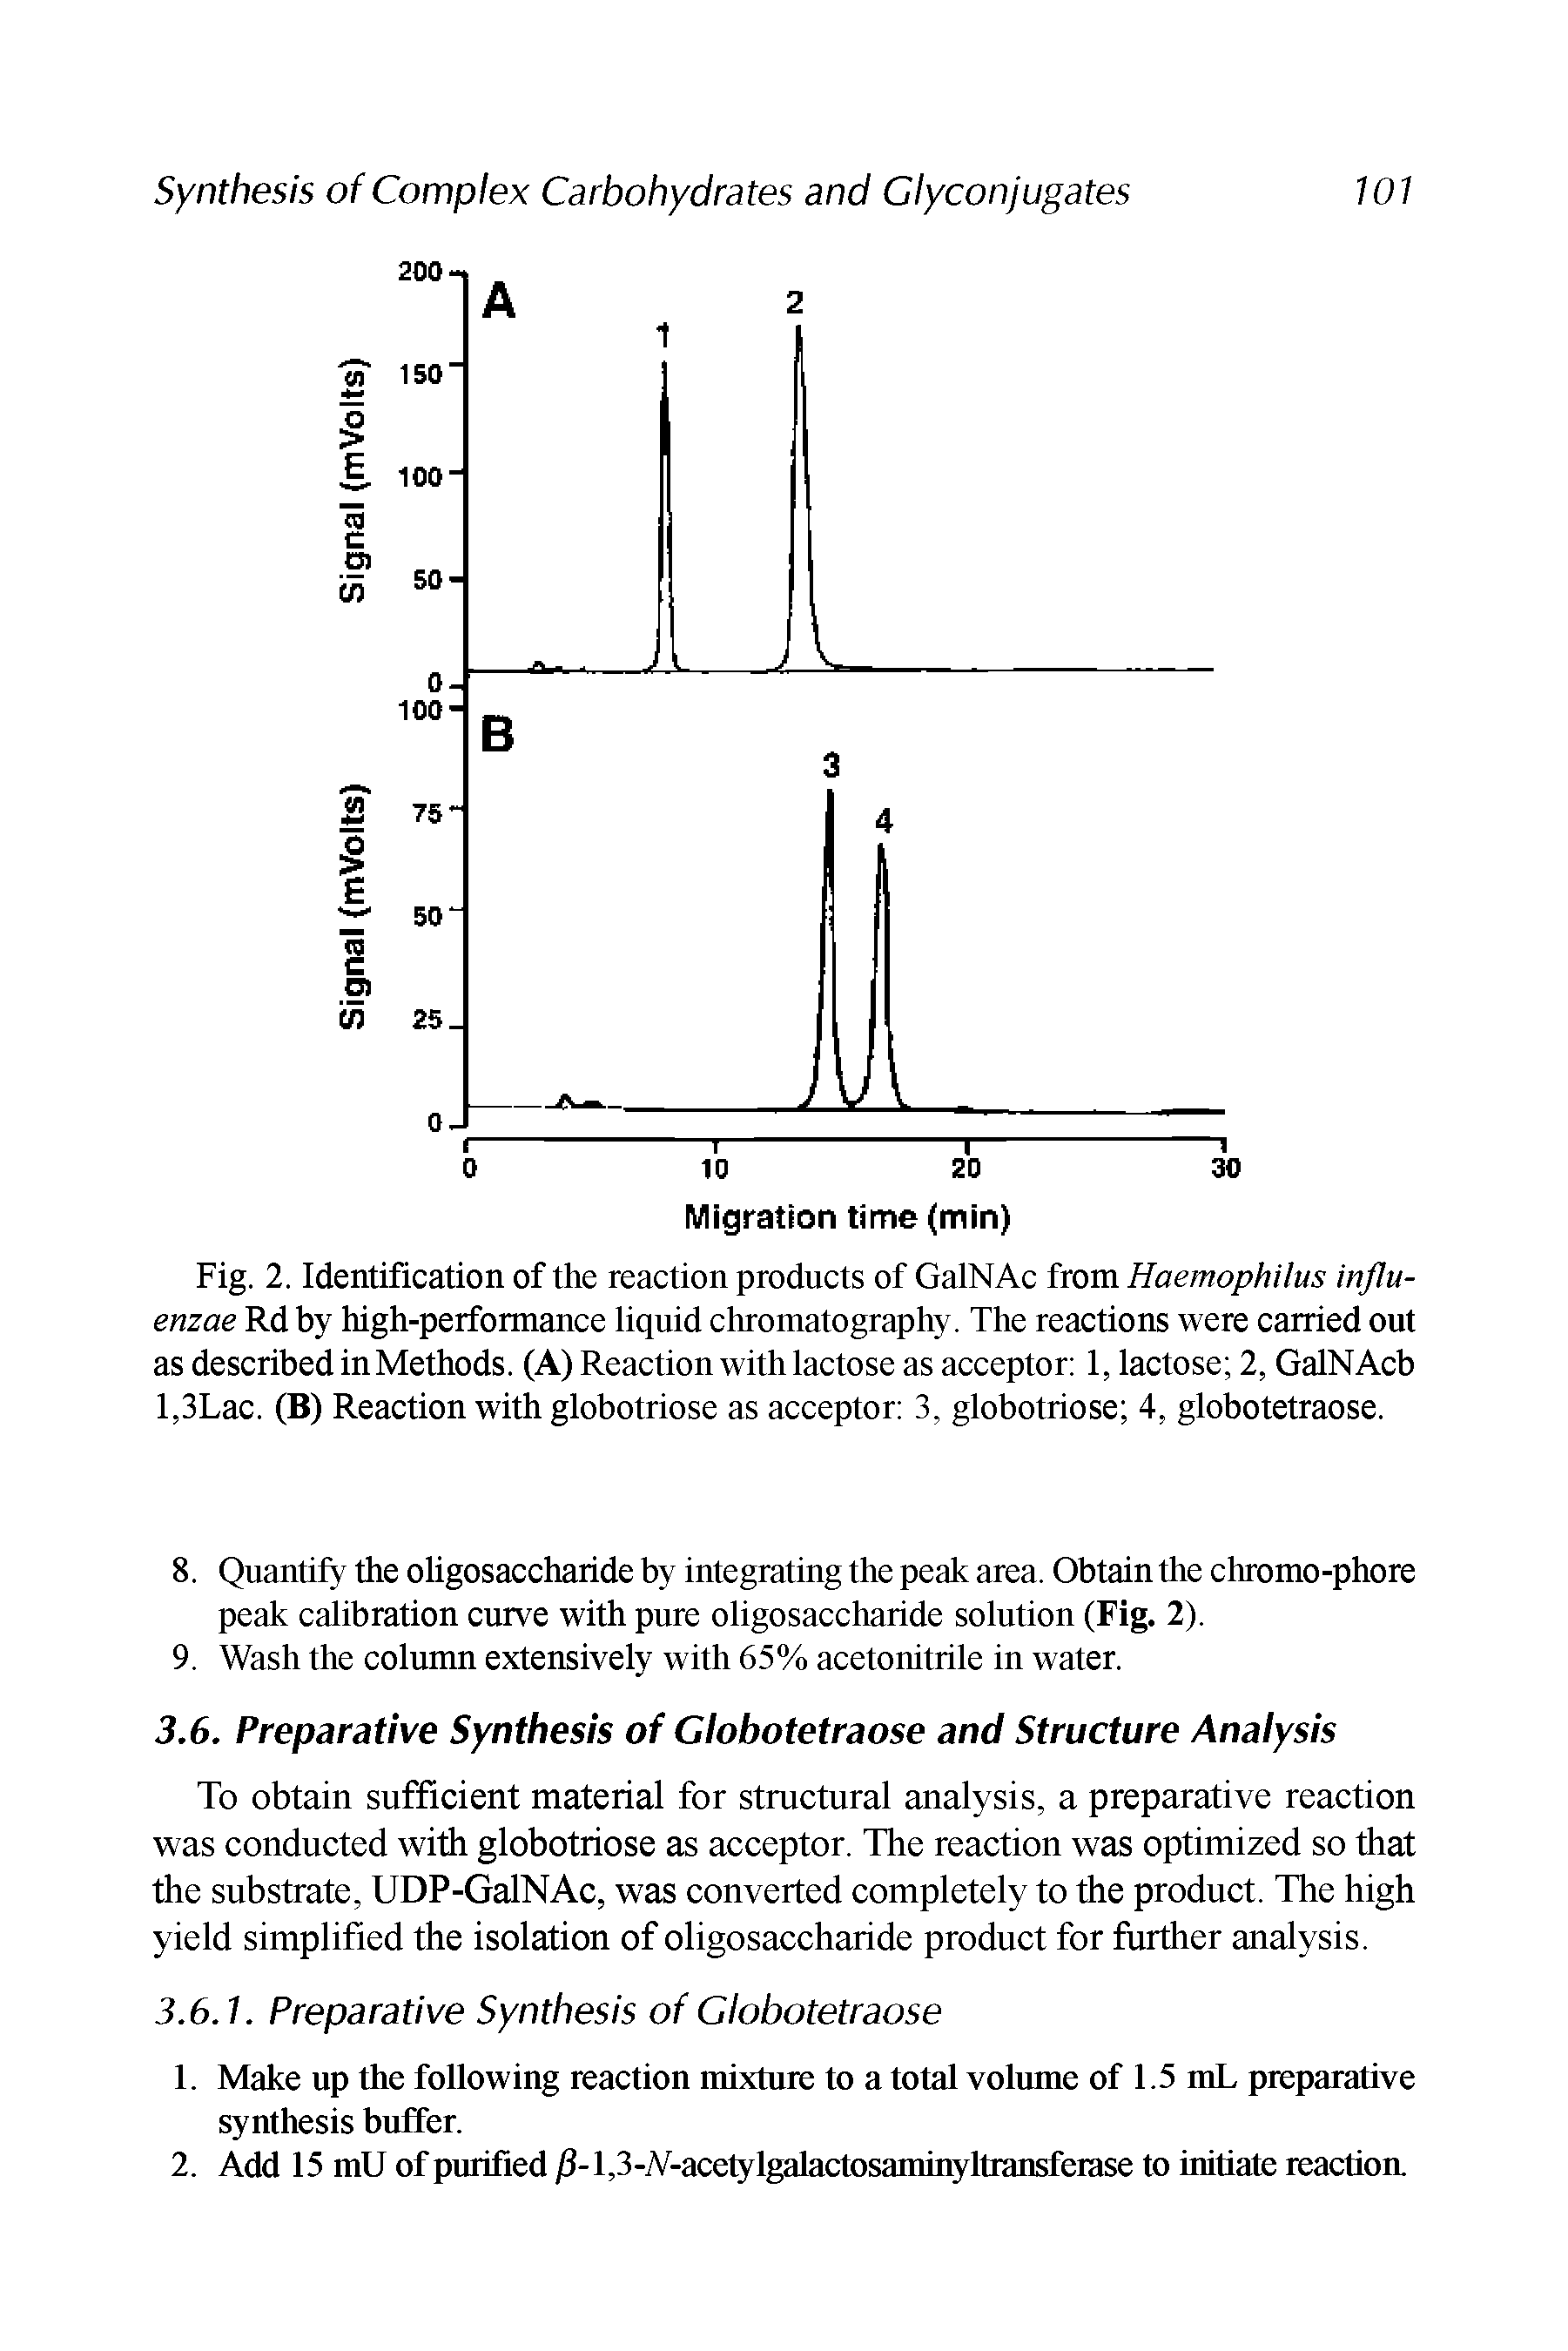 Fig. 2. Identification of the reaction products of GalNAc from Haemophilus influenzae Rd by high-performance liquid chromatography. The reactions were carried out as described in Methods. (A) Reaction with lactose as acceptor 1, lactose 2, GalNAcb l,3Lac. (B) Reaction with globotriose as acceptor 3, globotriose 4, globotetraose.